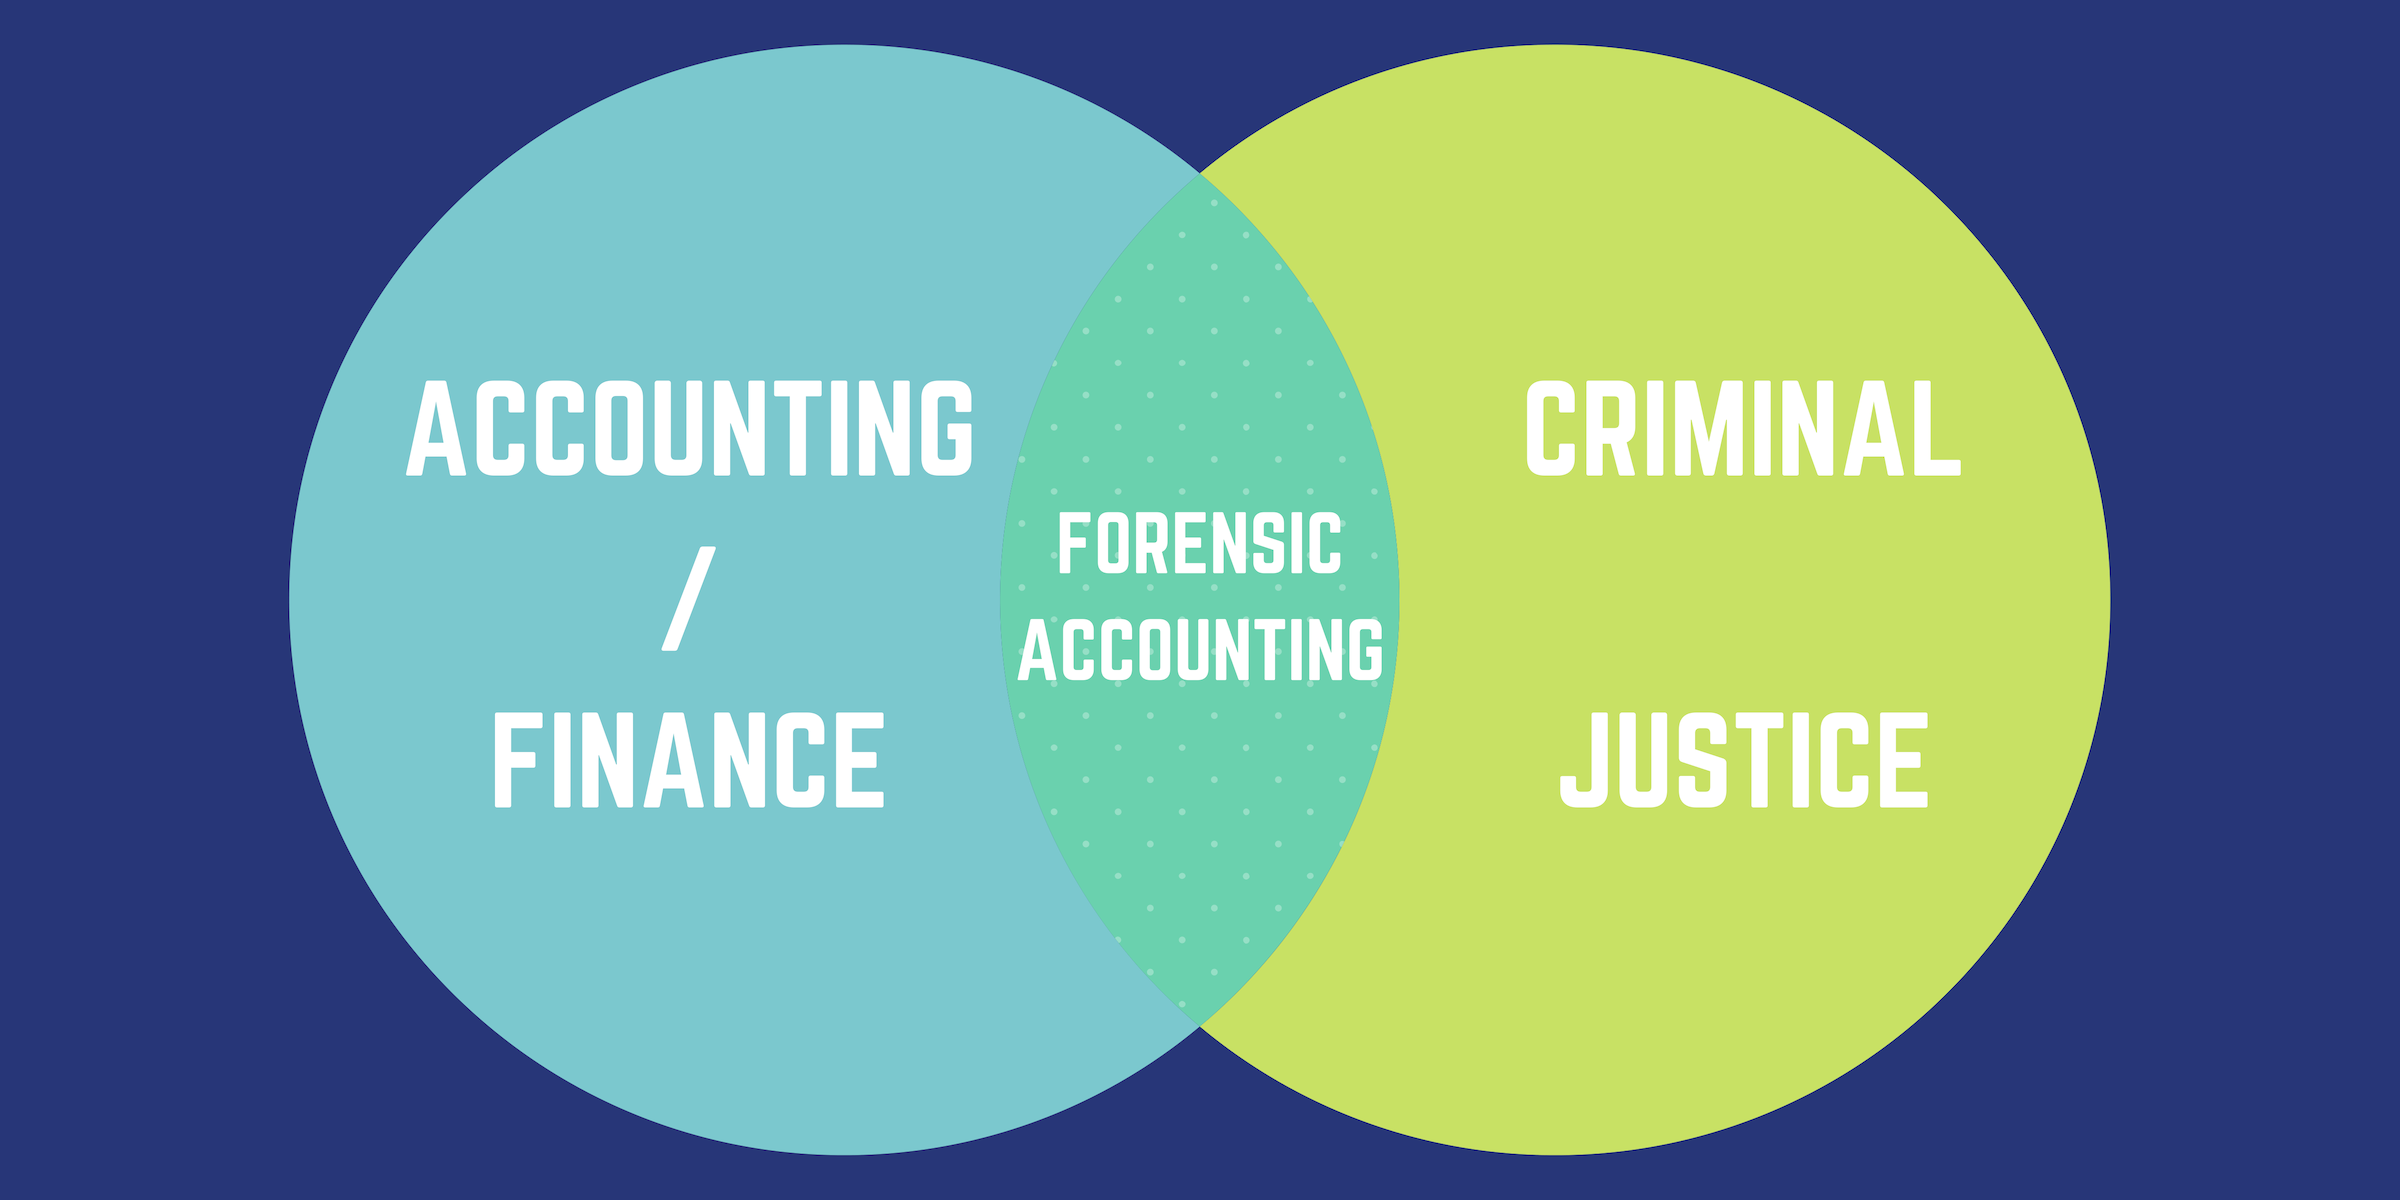 Accounting / finance - forensic accounting - criminal justice